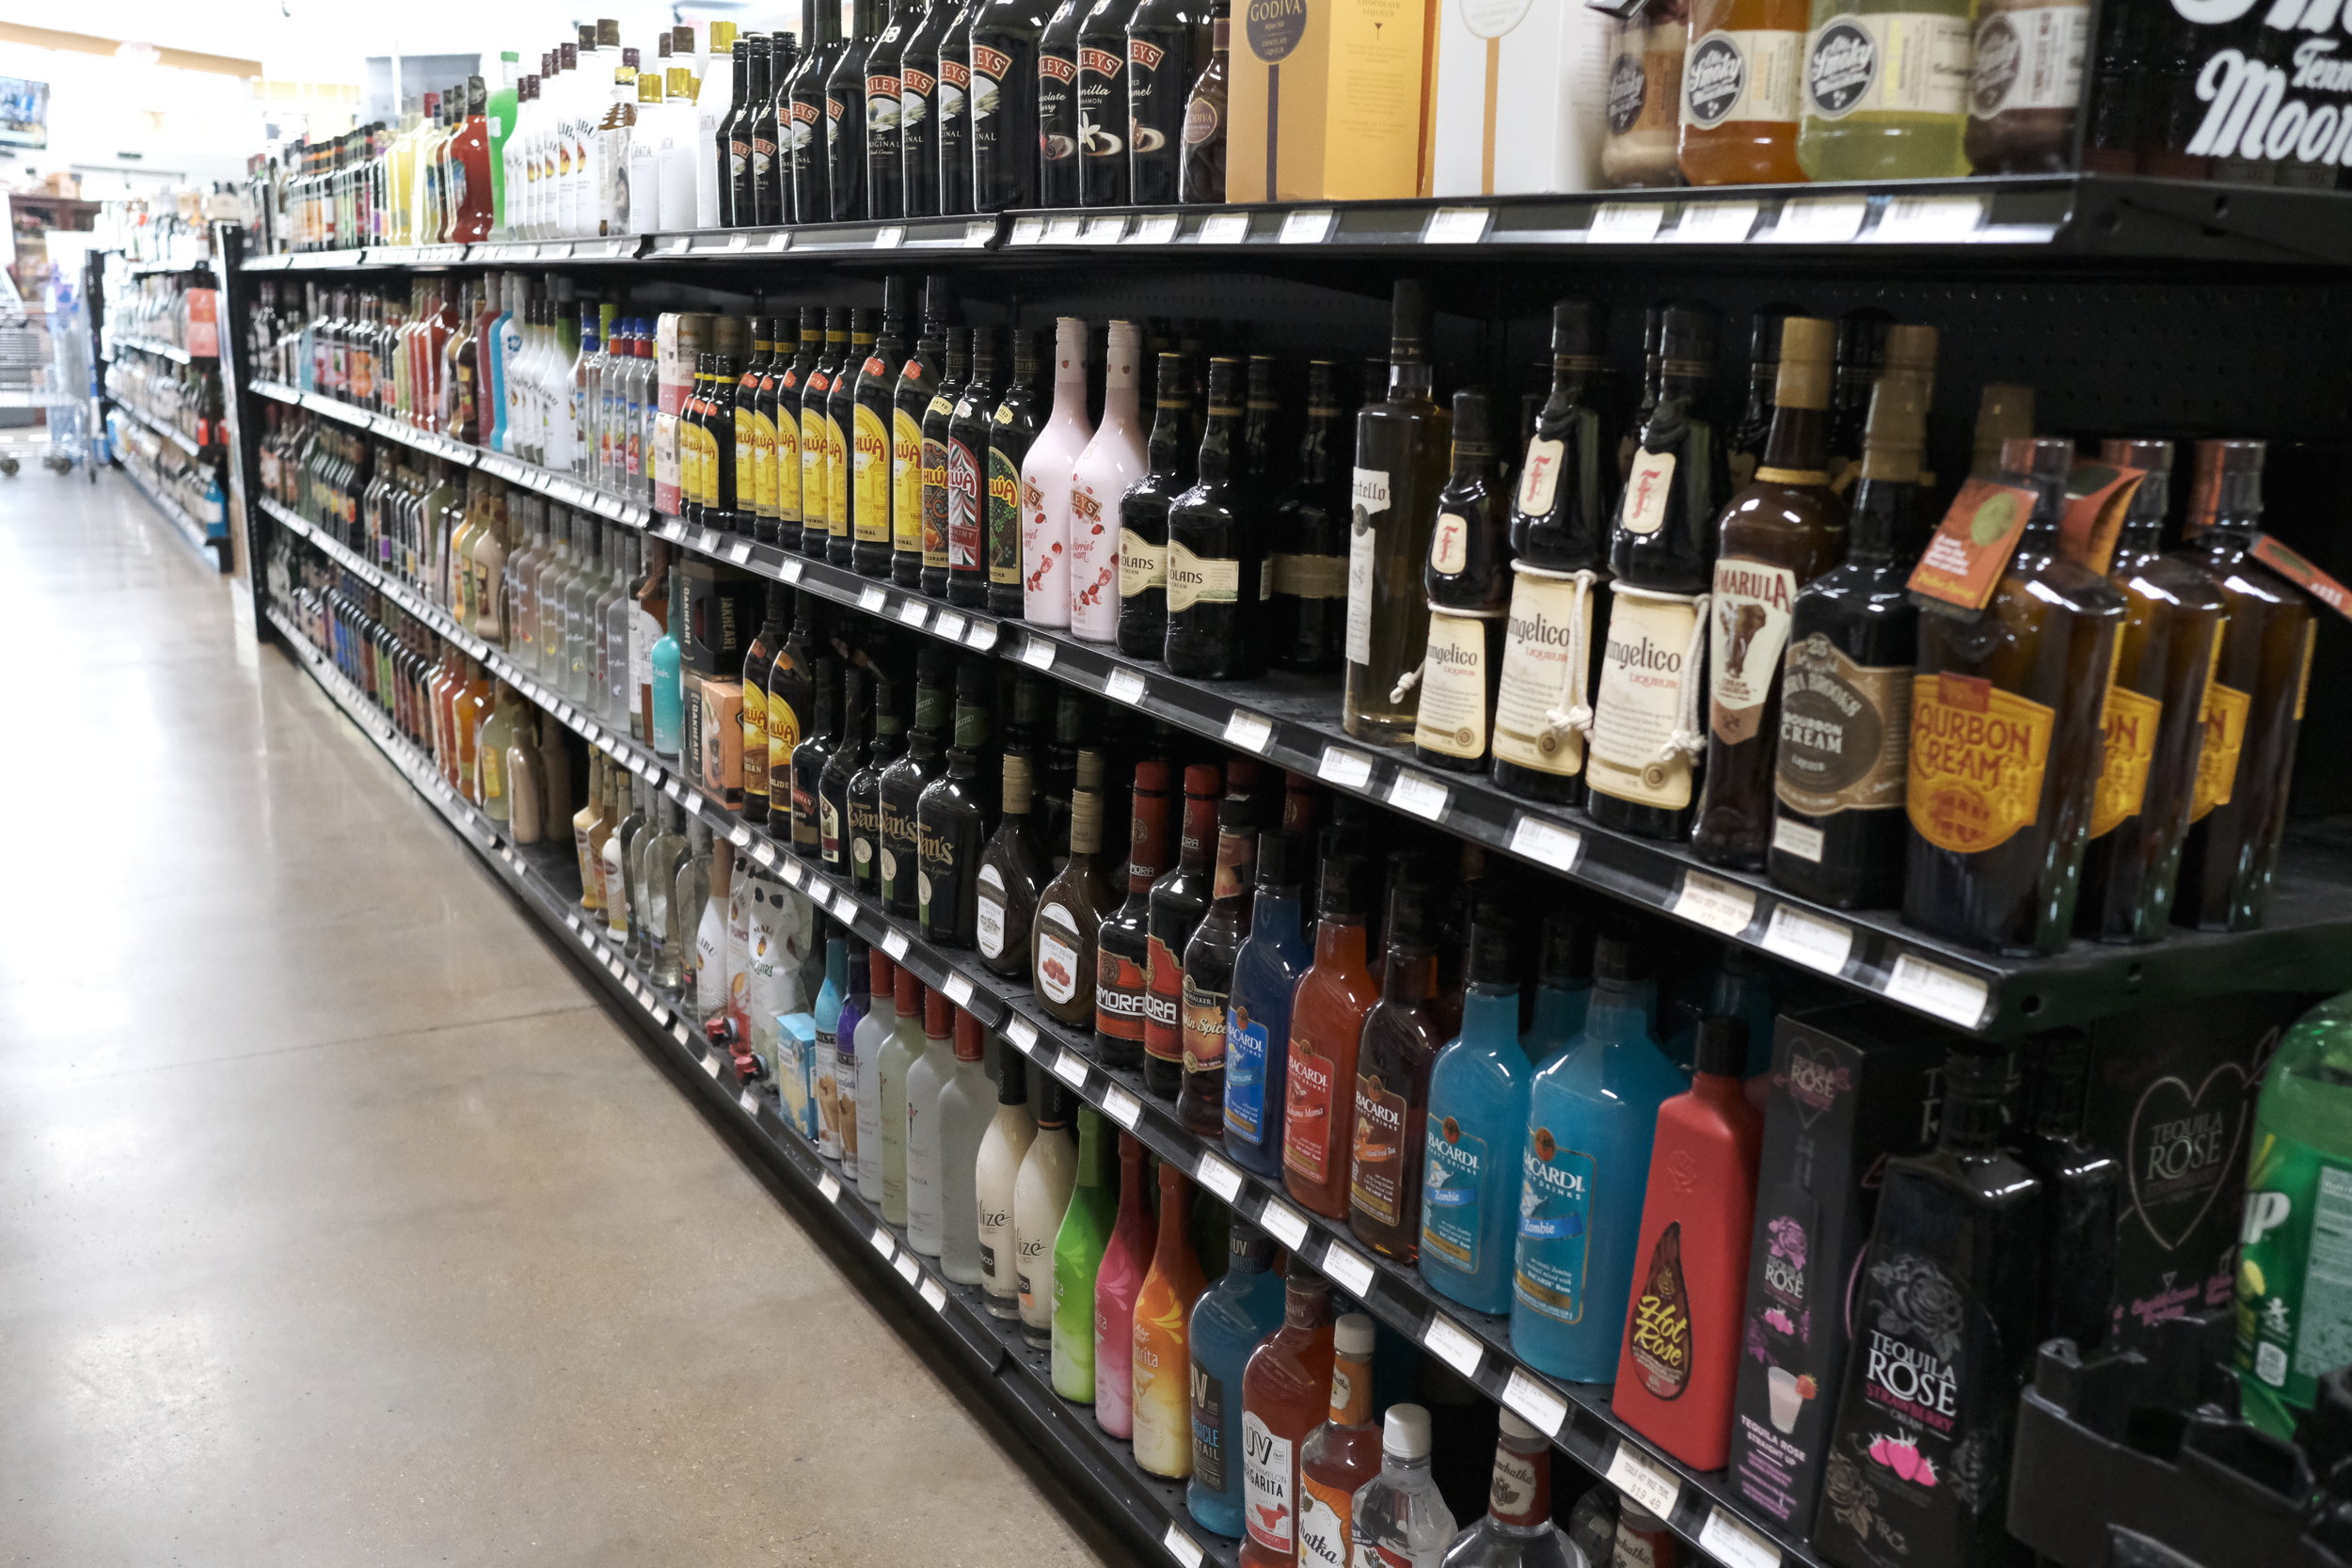  From Bailey’s to Kahlua, Midori to Chambord, we have all the classic low proof liquors needed to craft your very best! 